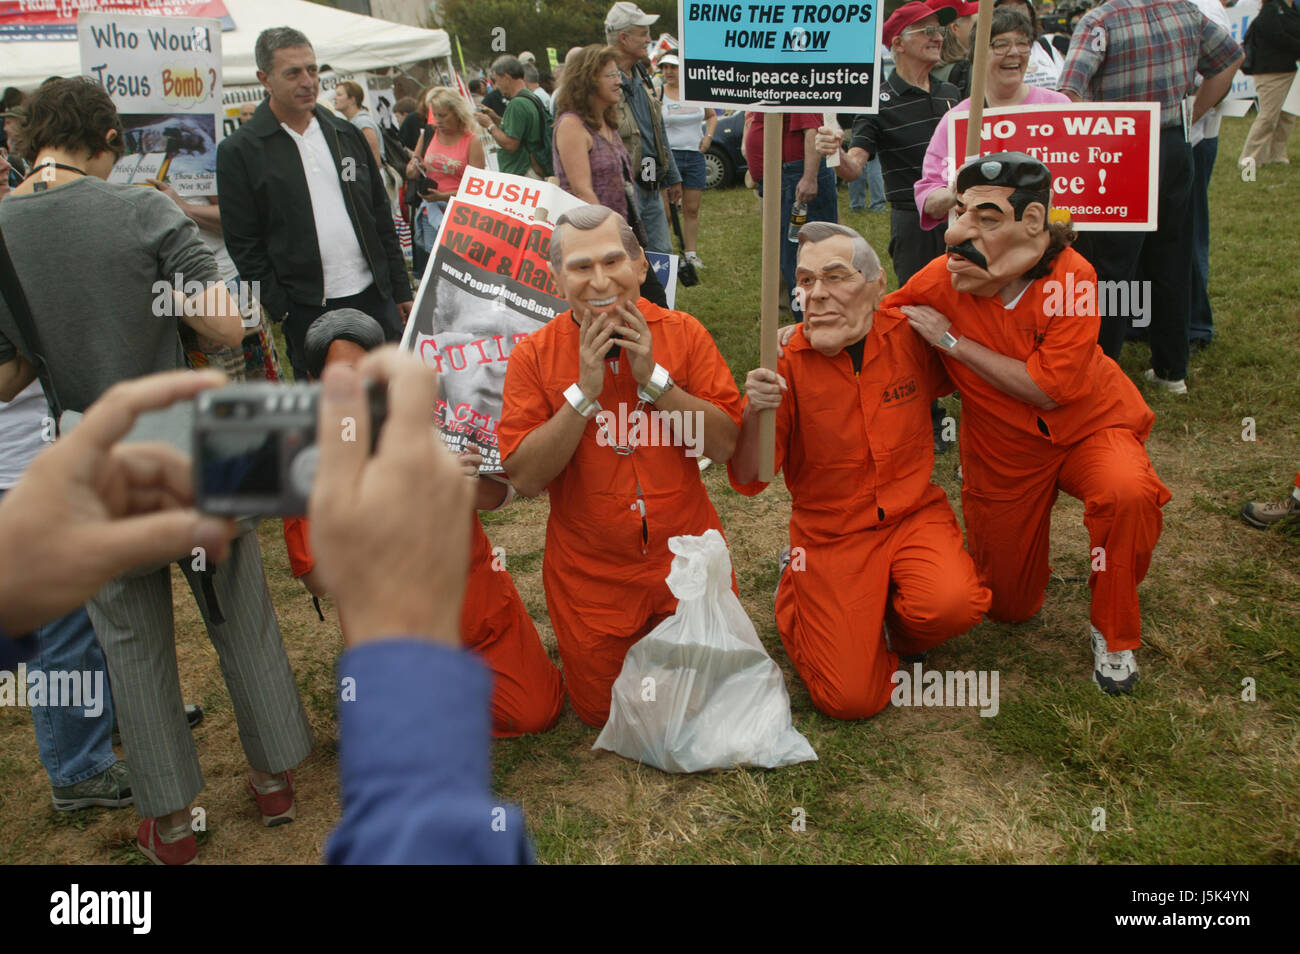 Bush, Rumsfeld and Hussein impersonators are photographed during the anti-war march on Washington. Stock Photo